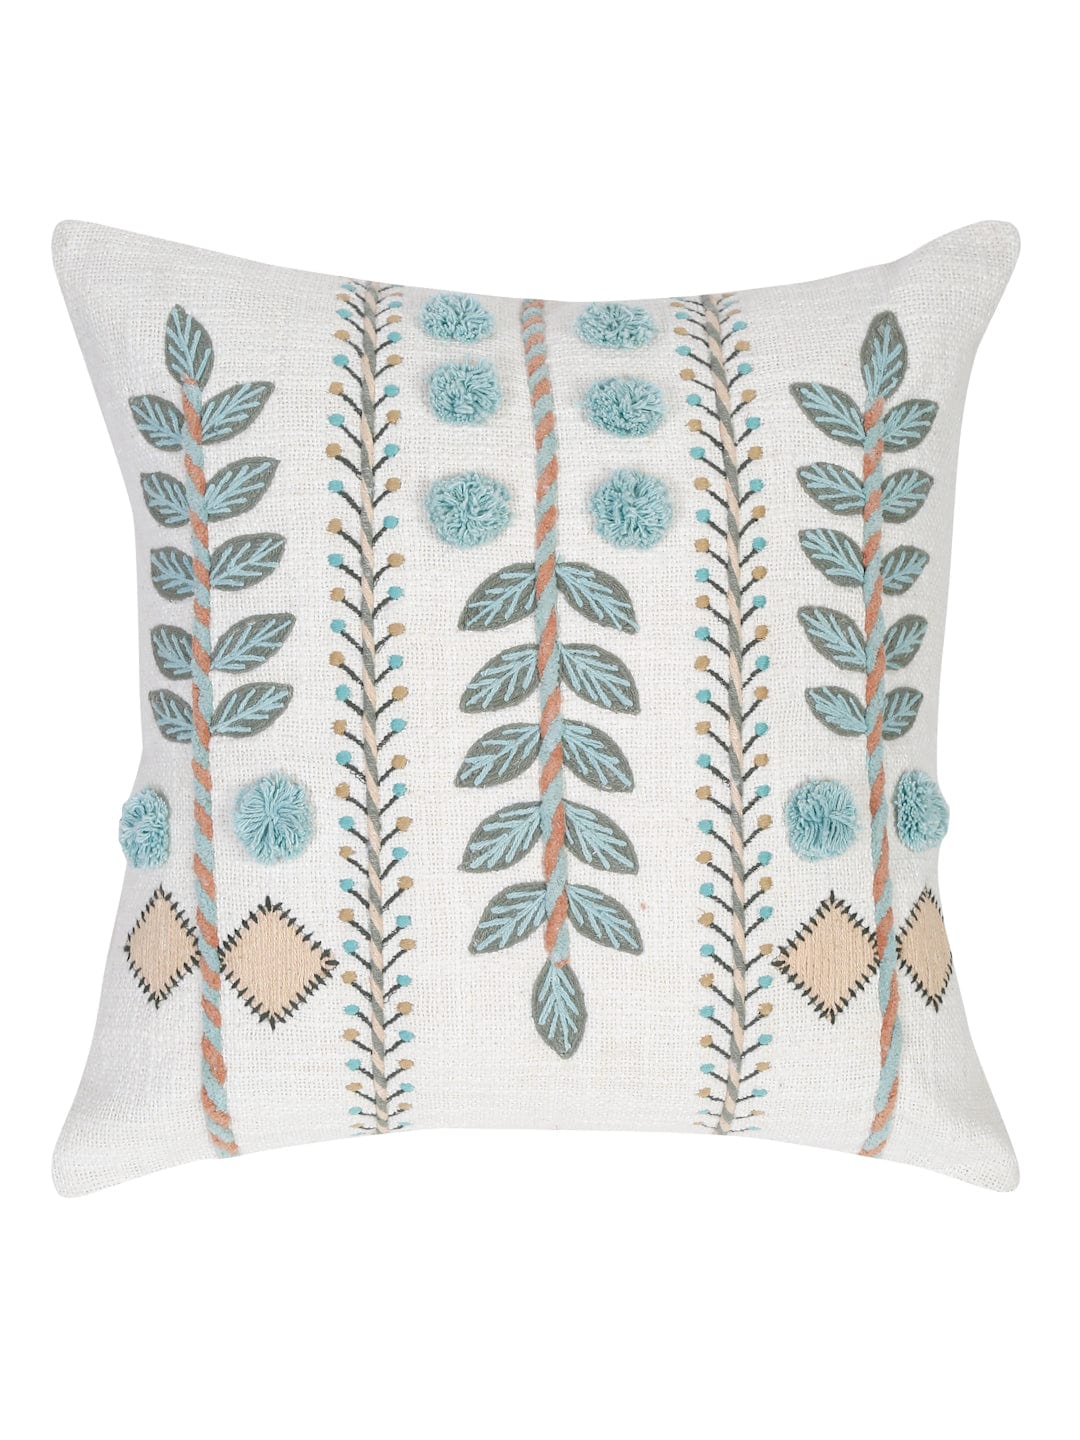 Set of 2 White & Aqua Cotton Embroidered Square Cushion Covers (18x18 Inch)